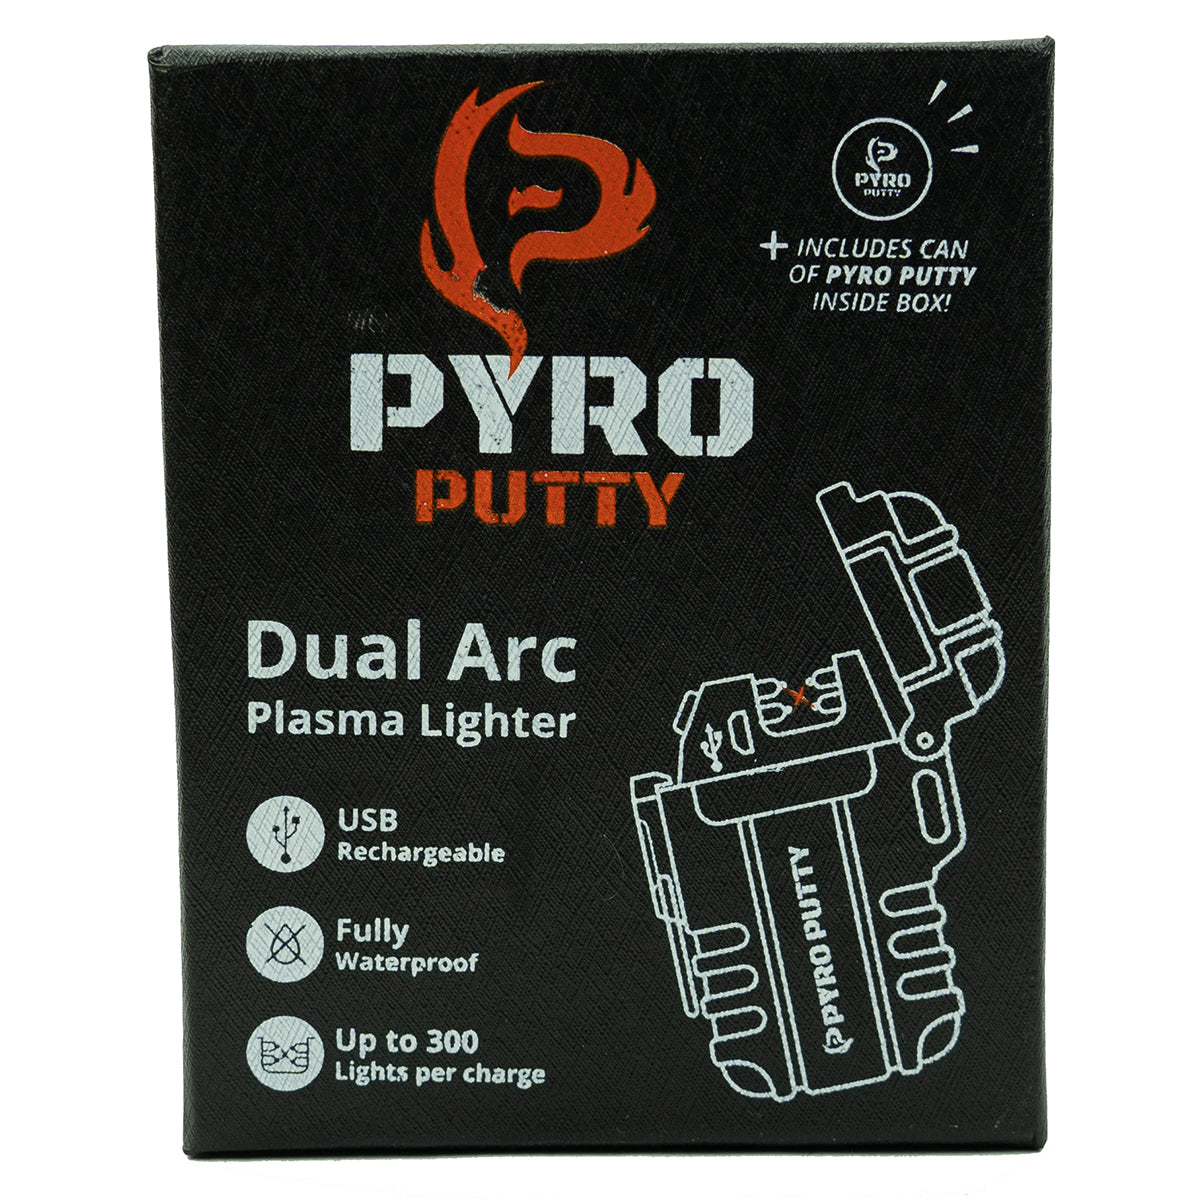 Pyro Putty Dual Arc Rechargeable Lighter in Pyro Putty Dual Arc Rechargeable Lighter by Pyro Putty | Camping - goHUNT Shop by GOHUNT | Pyro Putty - GOHUNT Shop